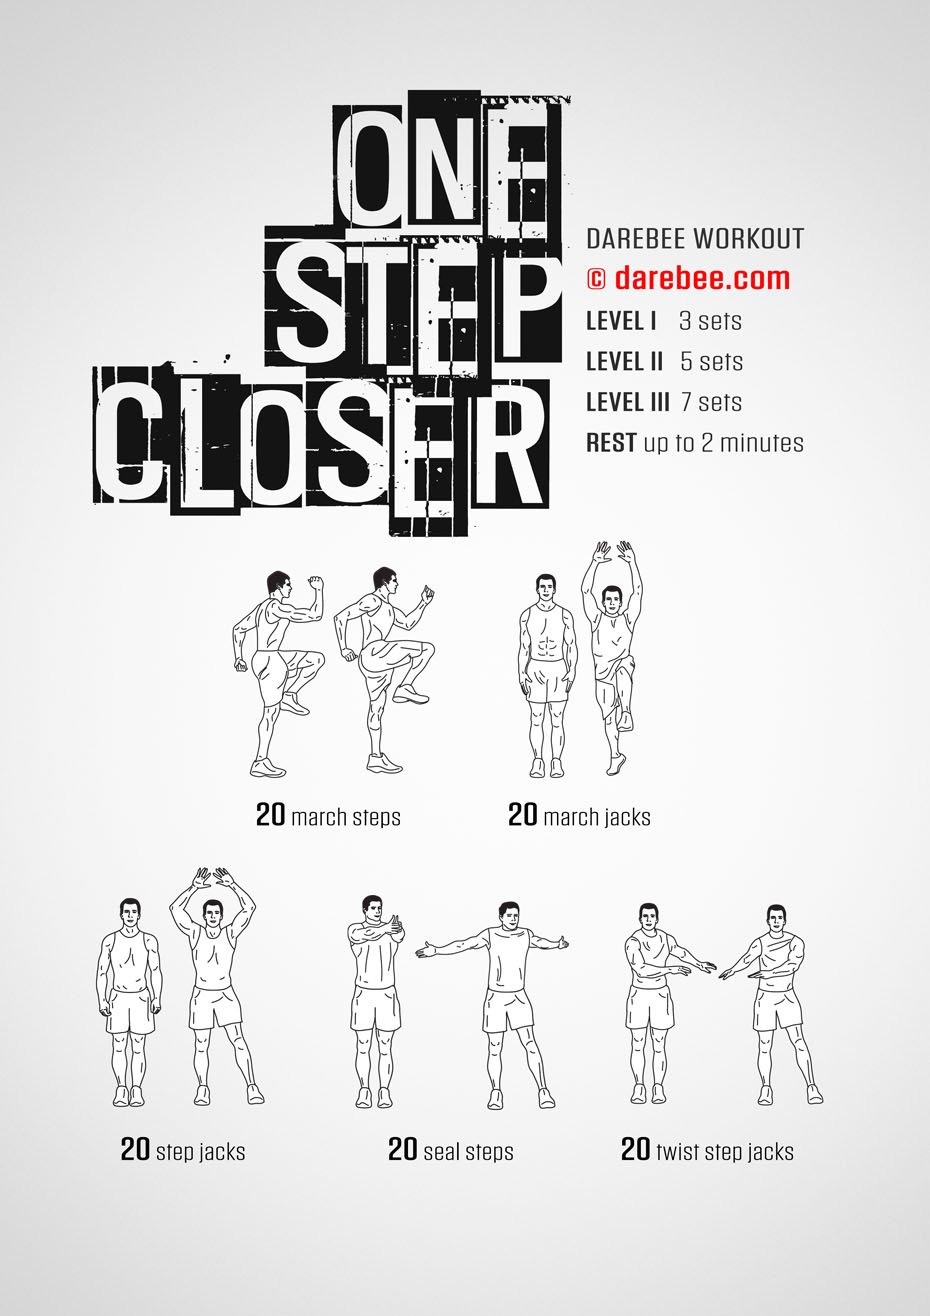 One Step Closer is a DAREBEE no-quipment home fitness aerobic and cardiovascular workout that will keep you younger, longer.